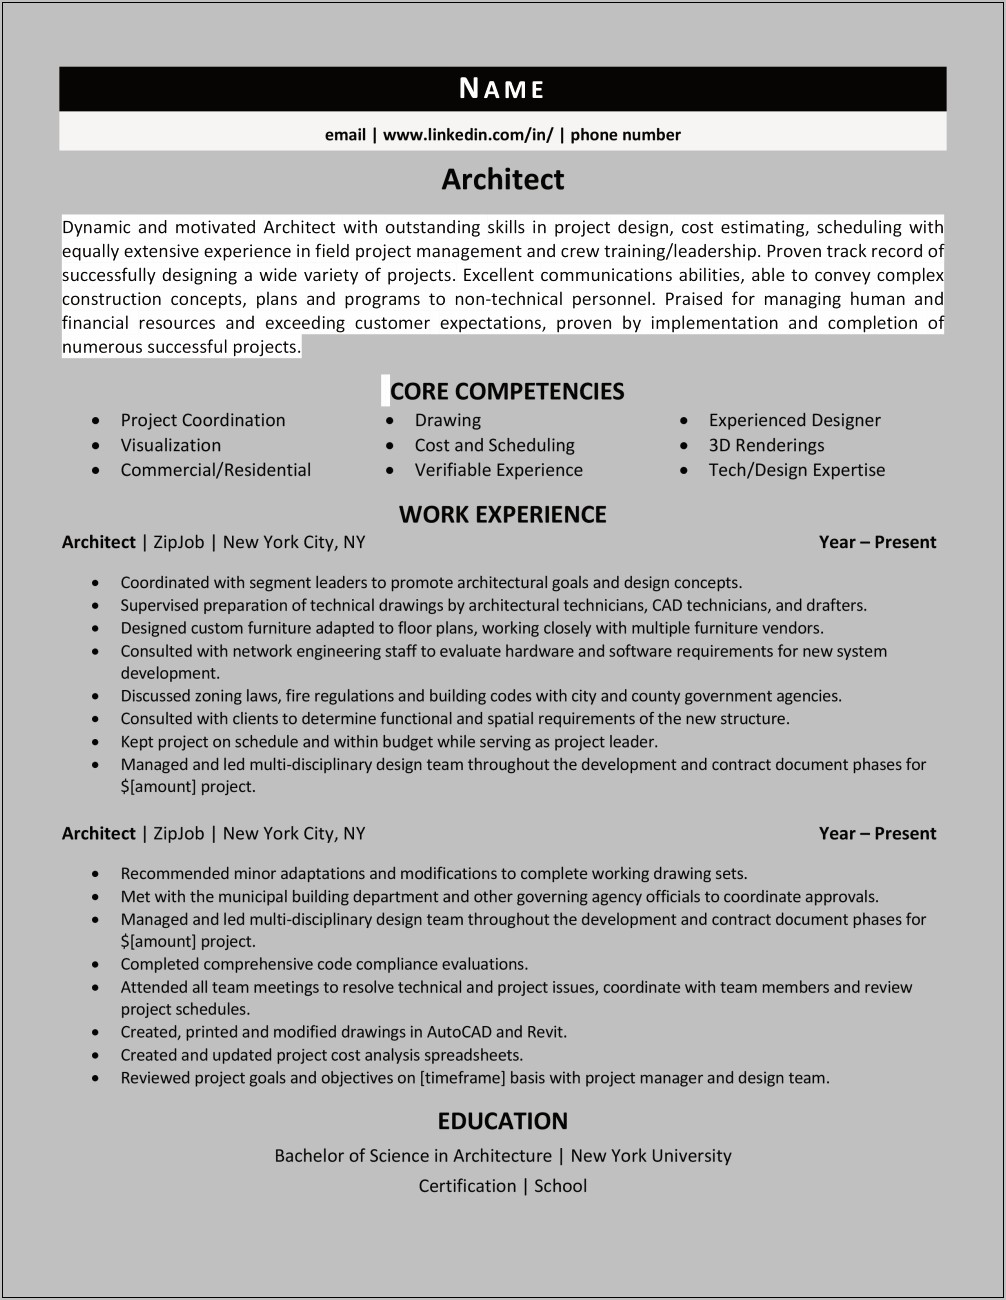 Examples Of Good Architecture Resumes